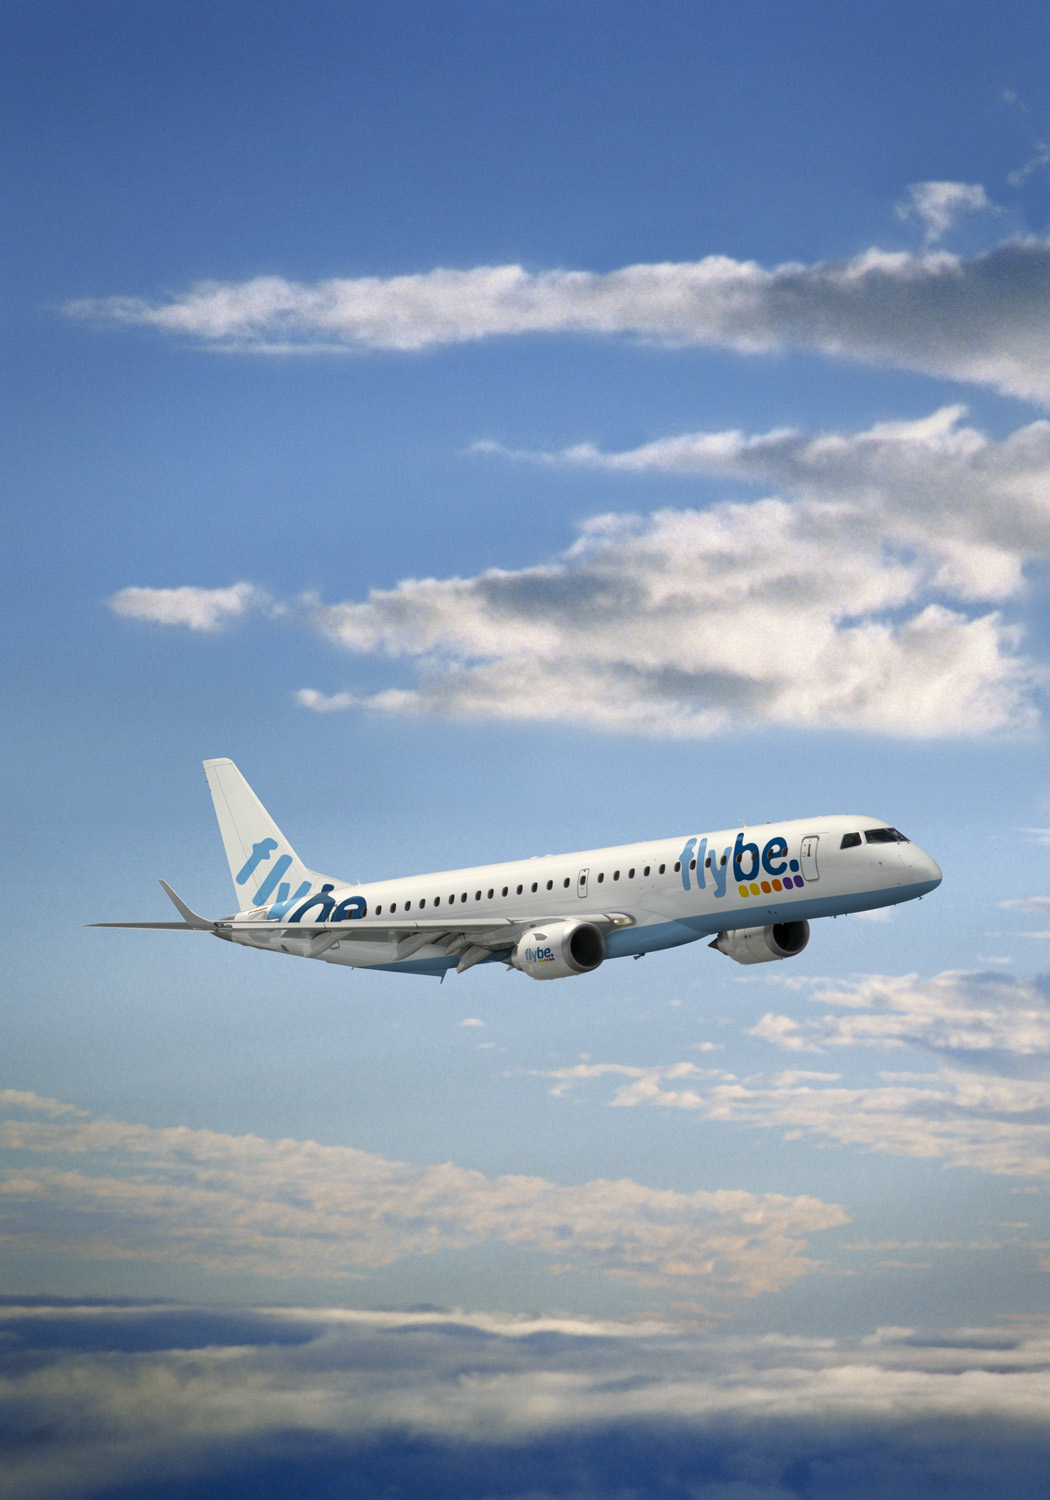 Just Corsica News: ** Flybe Sale on Flights to Corsica